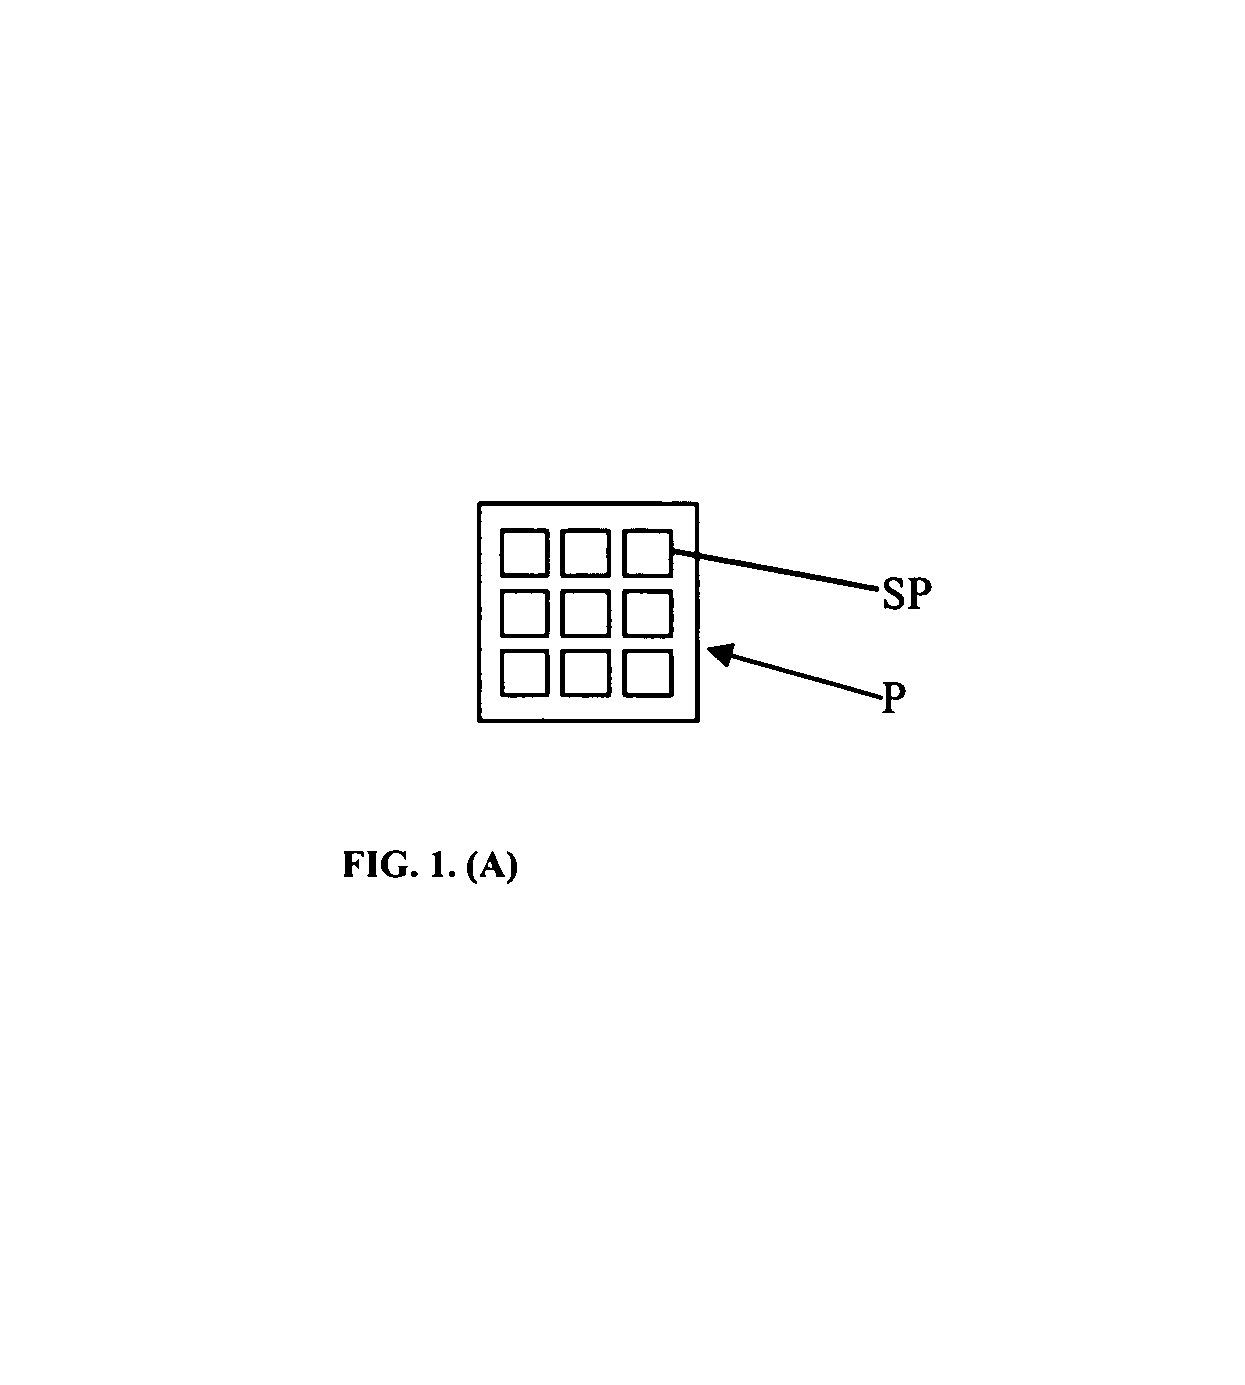 Three-dimensional autostereoscopic display and method for reducing crosstalk in three-dimensional displays and in other similar electro-optical devices